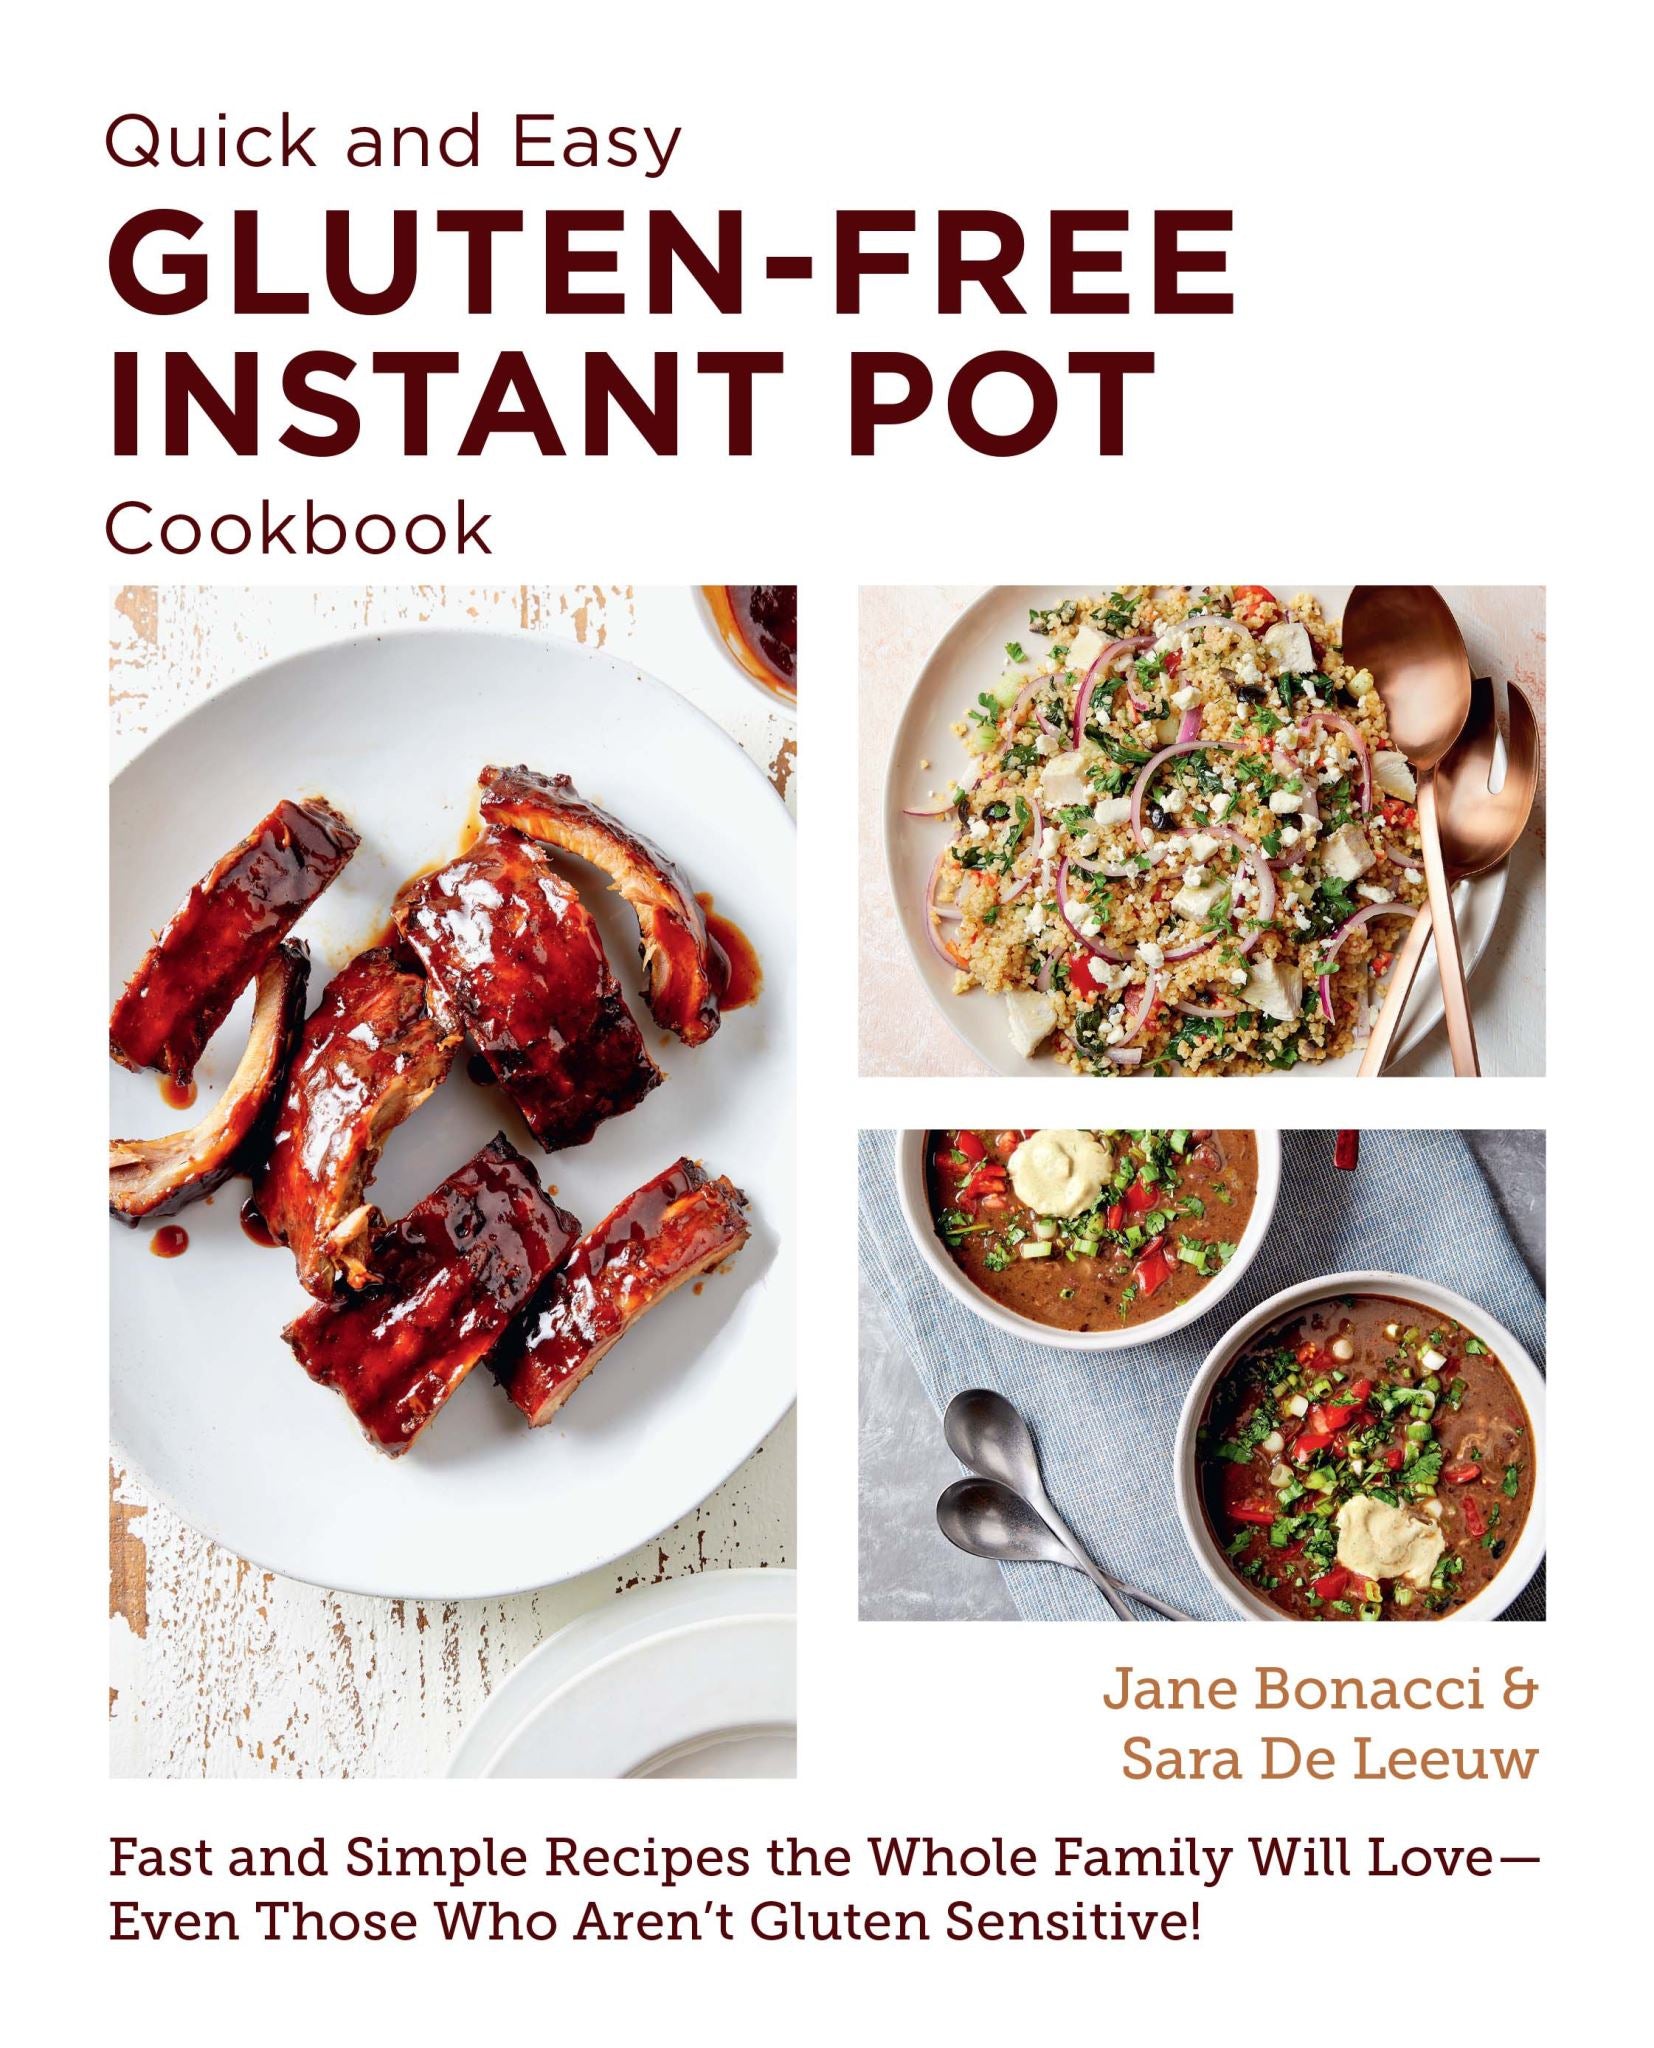 Gluten Free Instant Pot Cookbook (Quick and Easy)